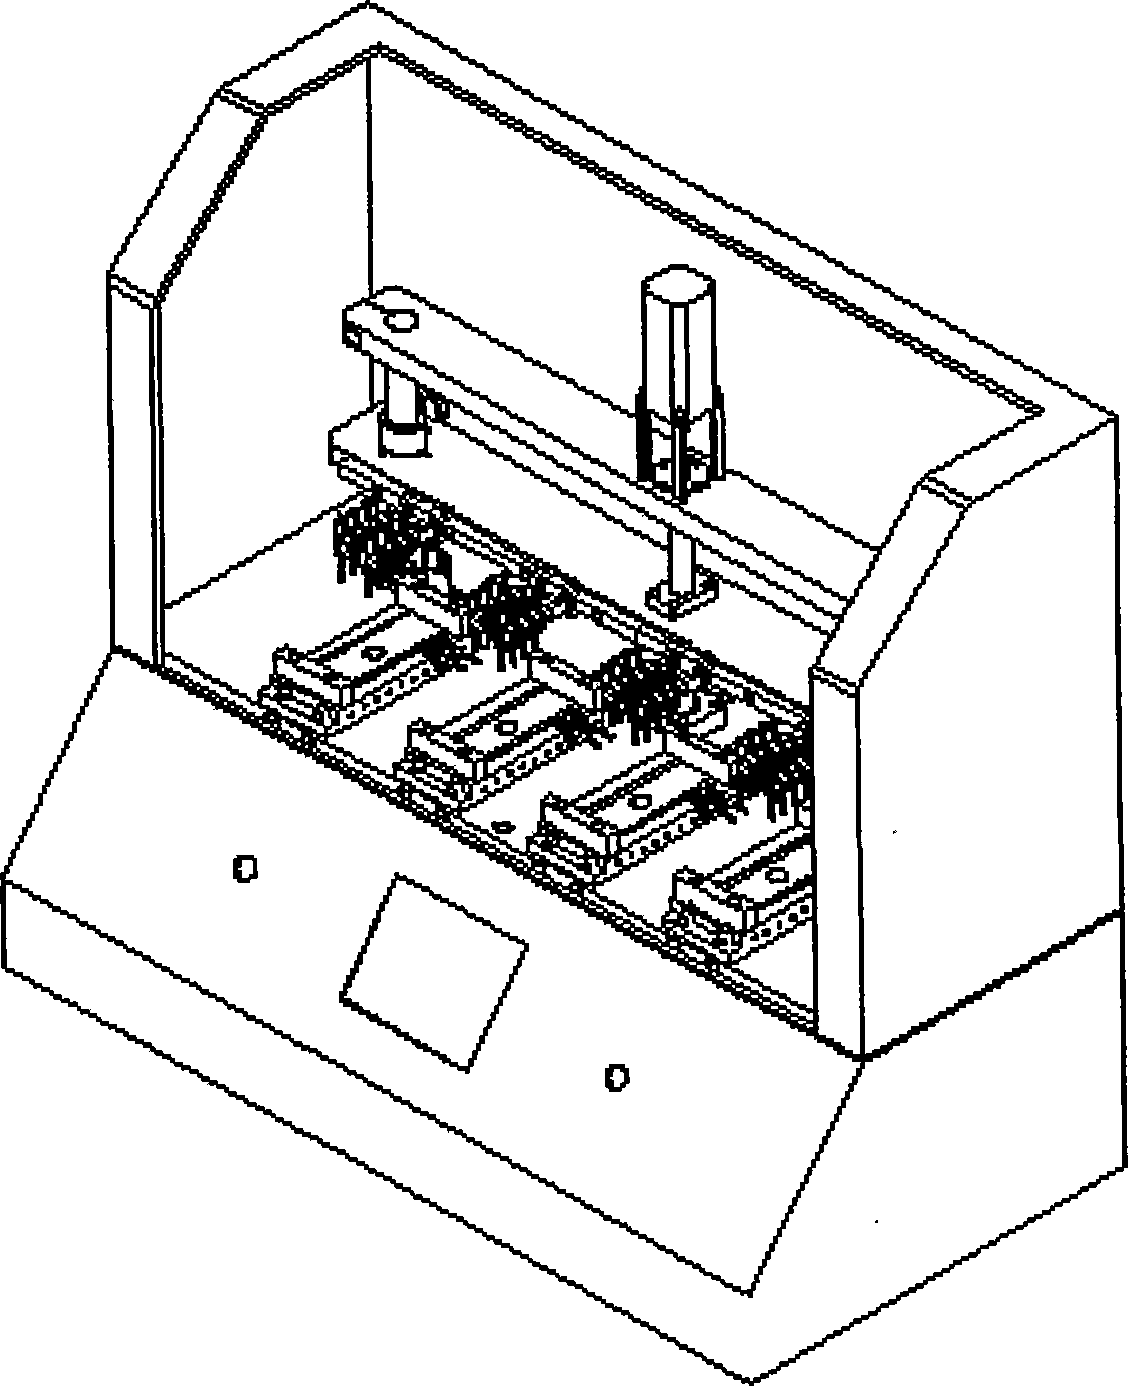 Press keys and touch screen testing device